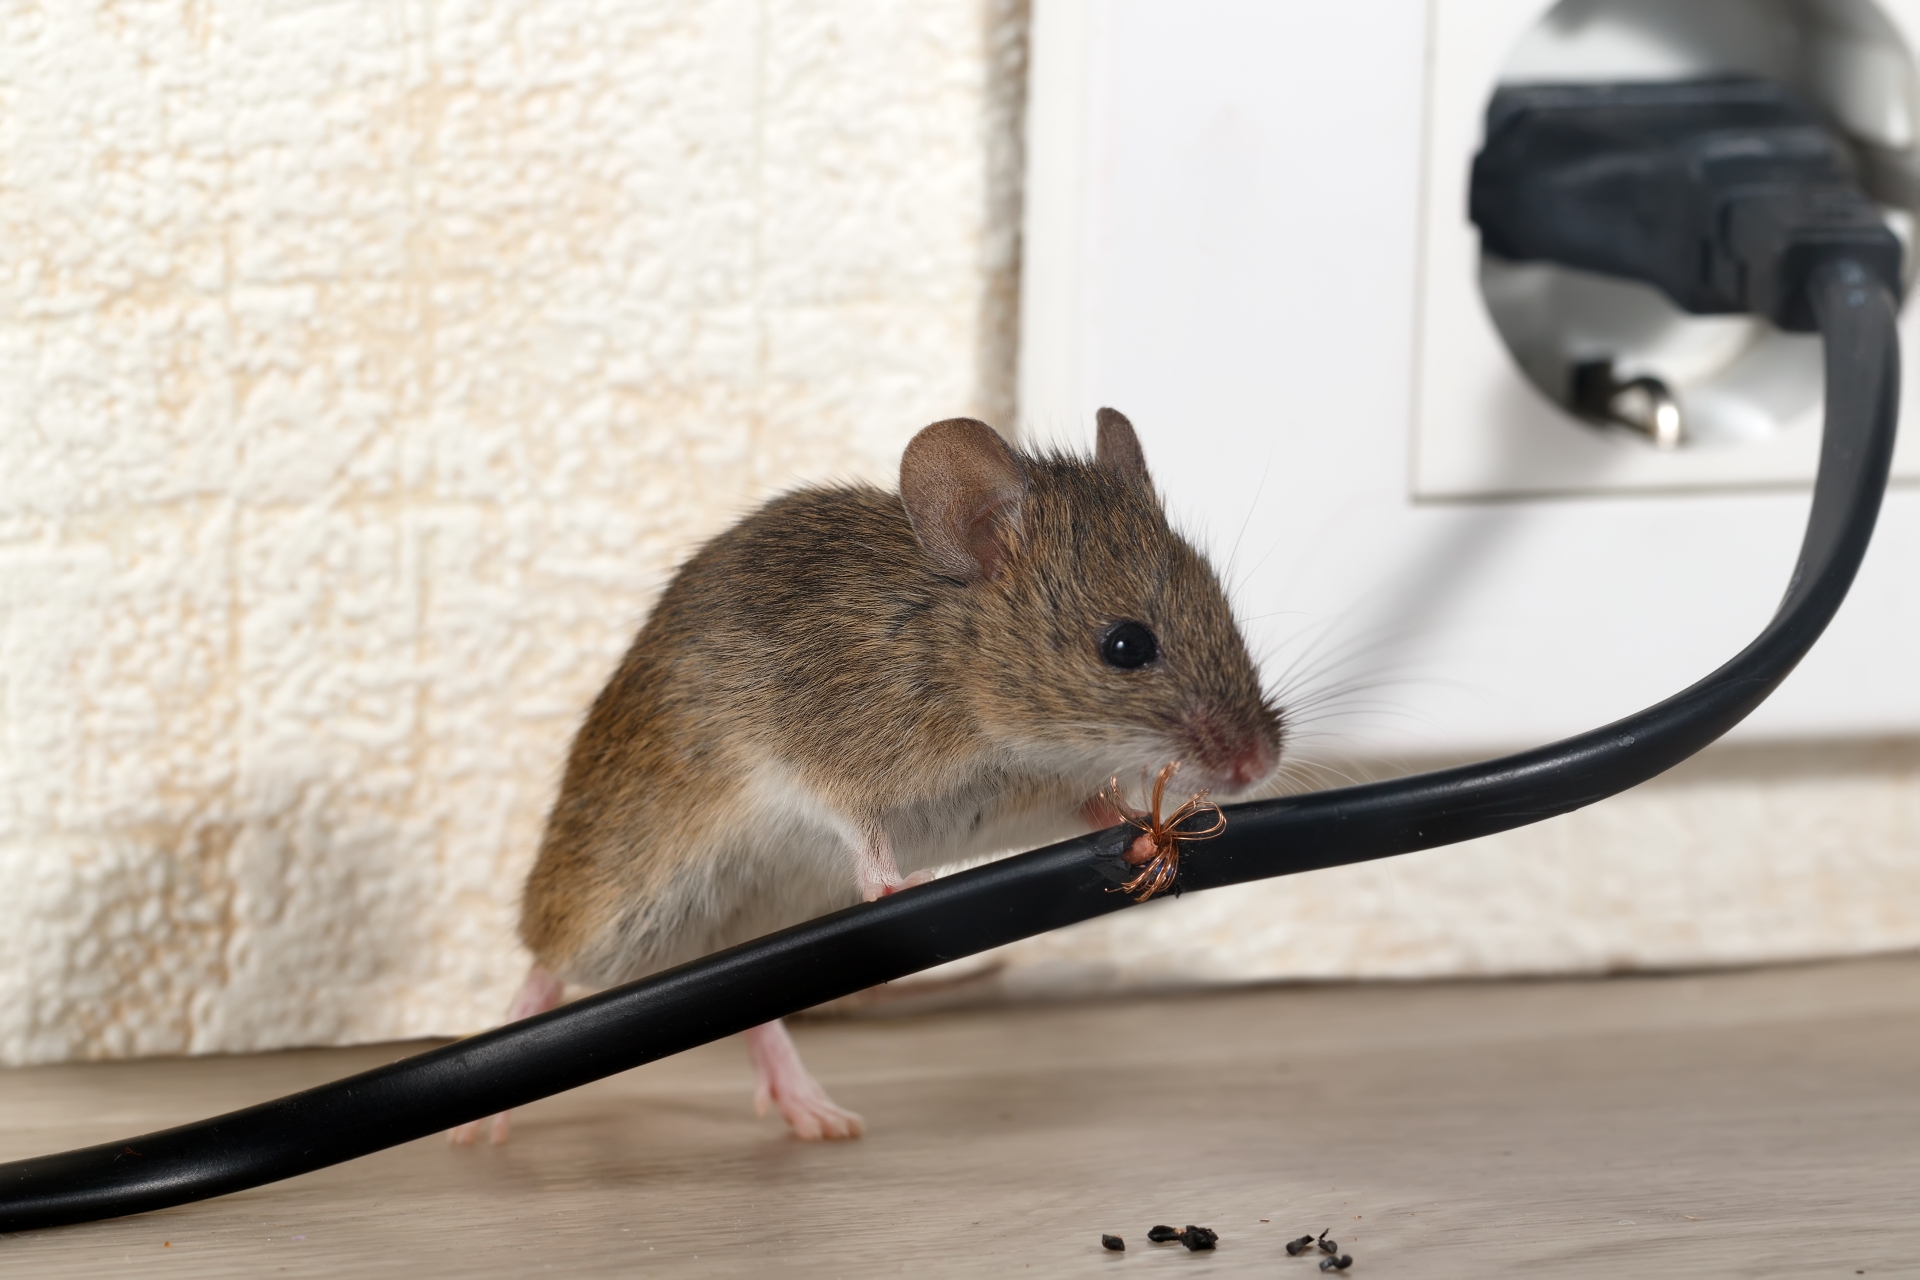 Mice Infestation, Pest Control in Hackney, Homerton, E9. Call Now 020 8166 9746